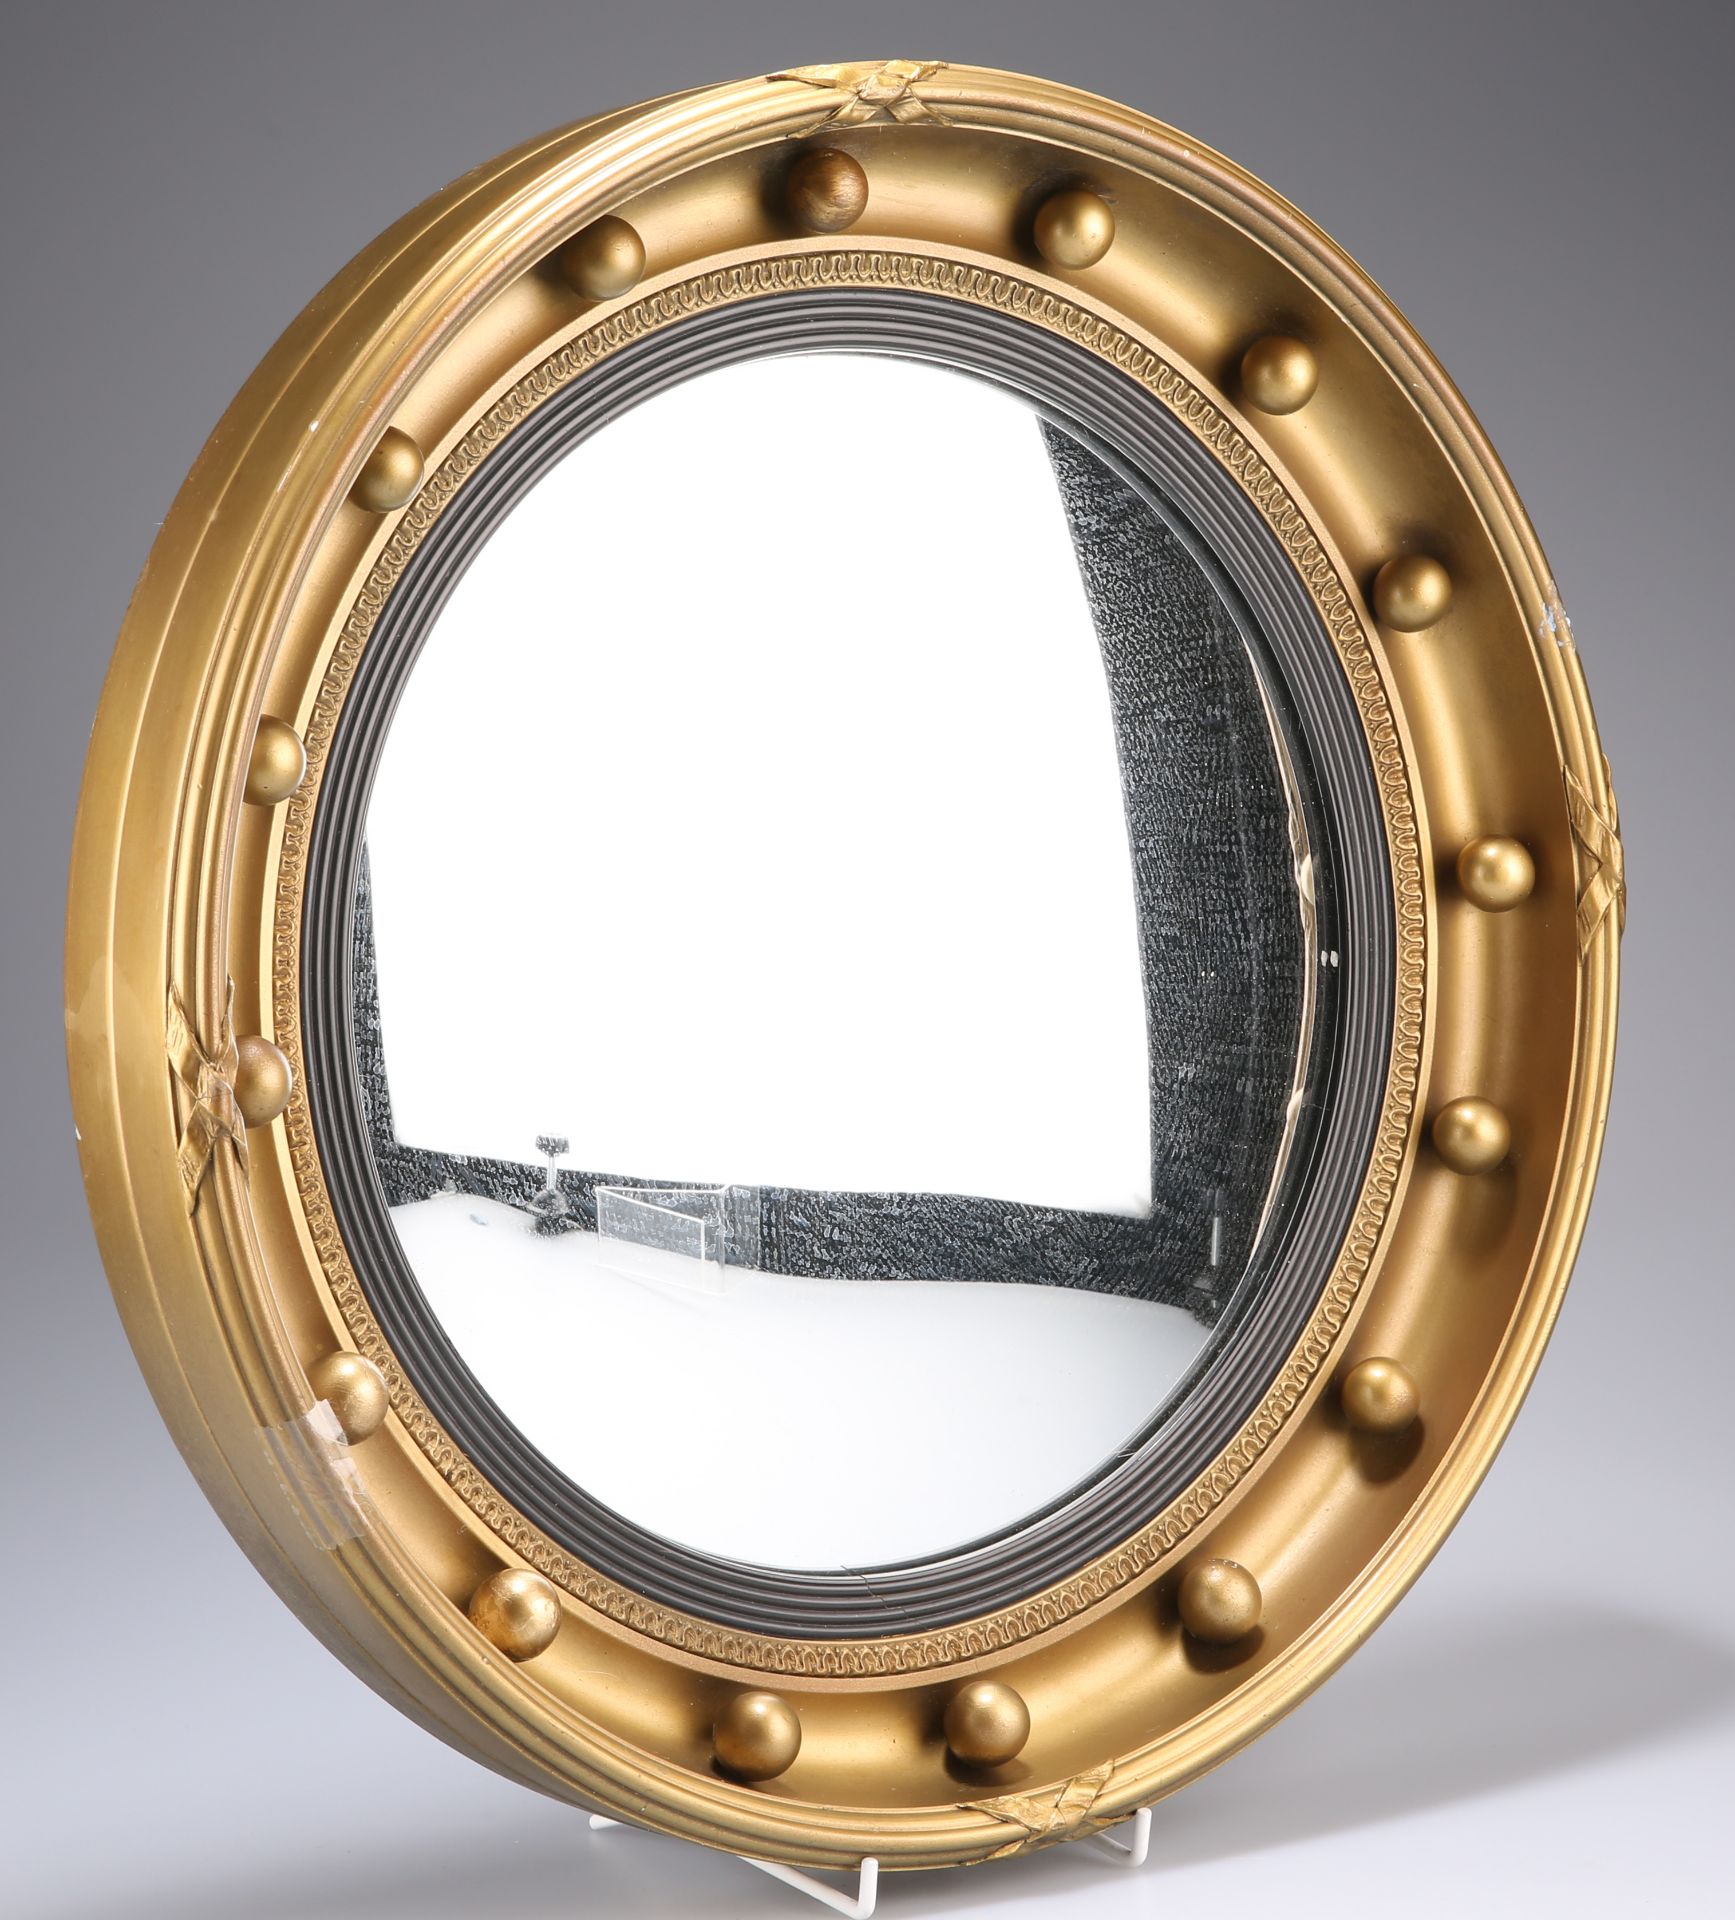 A REGENCY STYLE GILT COMPOSITION CONVEX MIRROR, the circular frame with applied balls. 41cm